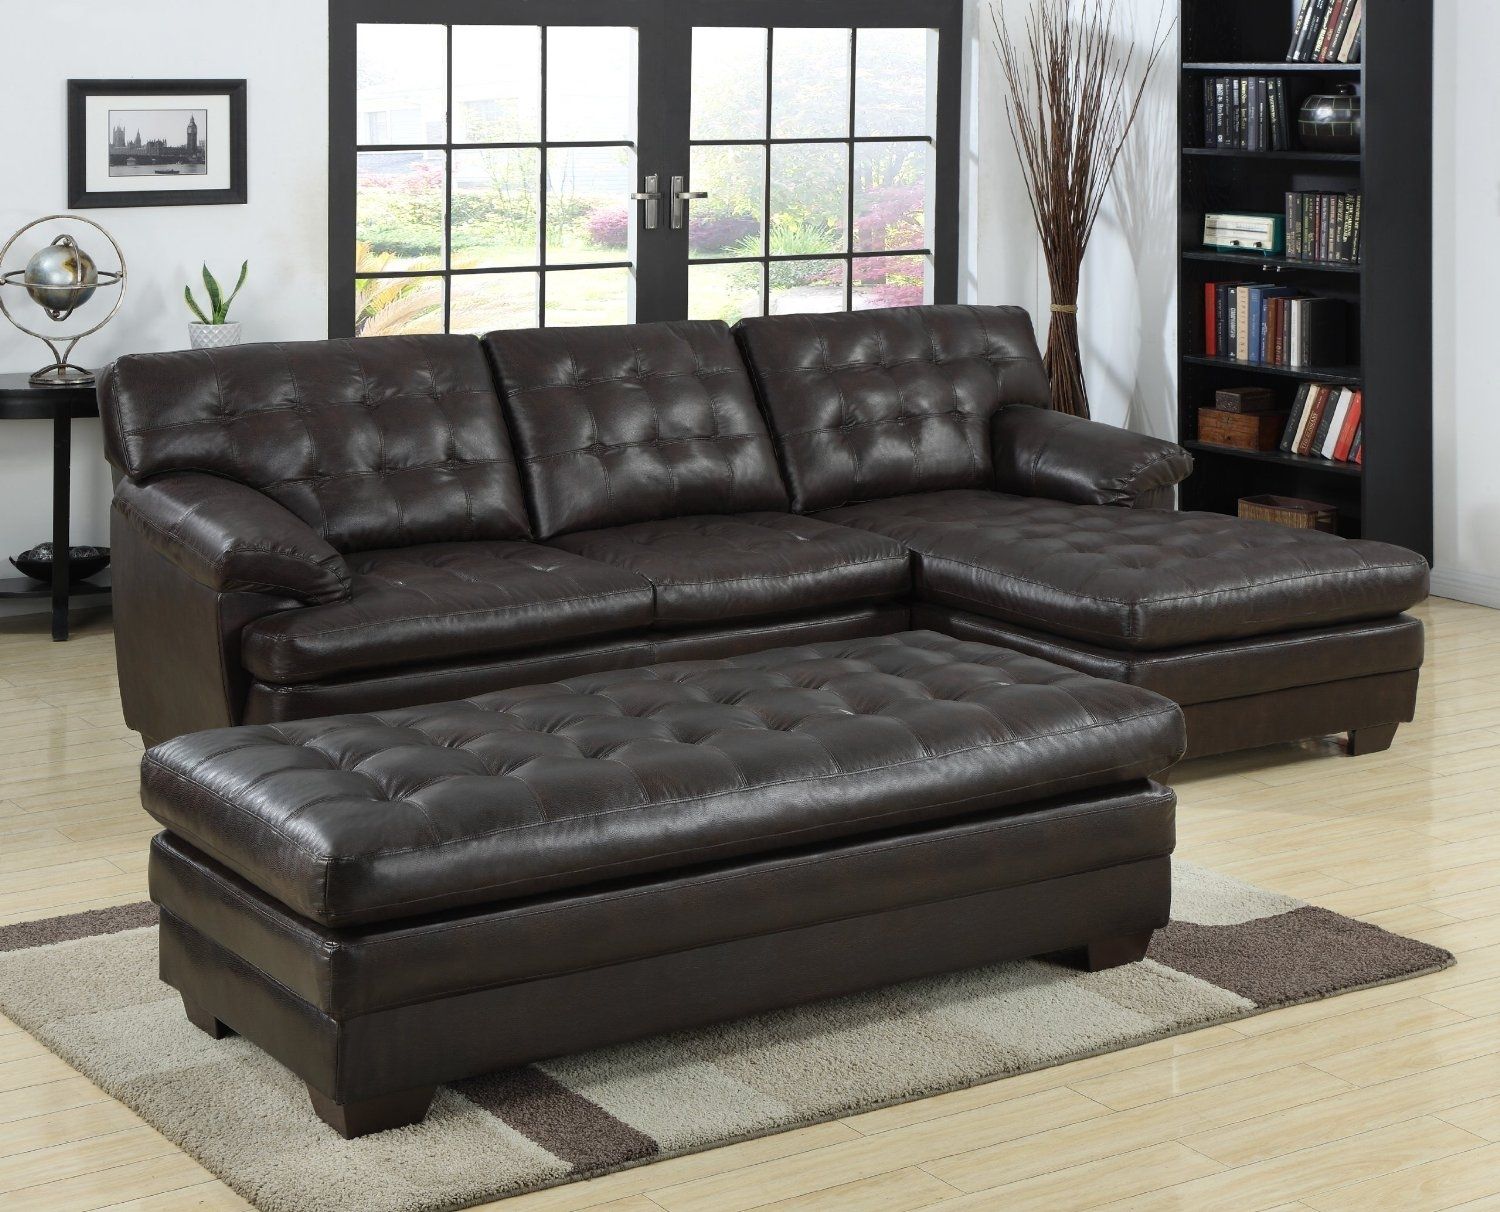 Black Tufted Leather Sectional Sofa With Chaise And Bench Seat Plus Regarding Tufted Sectional Sofas With Chaise (View 7 of 10)